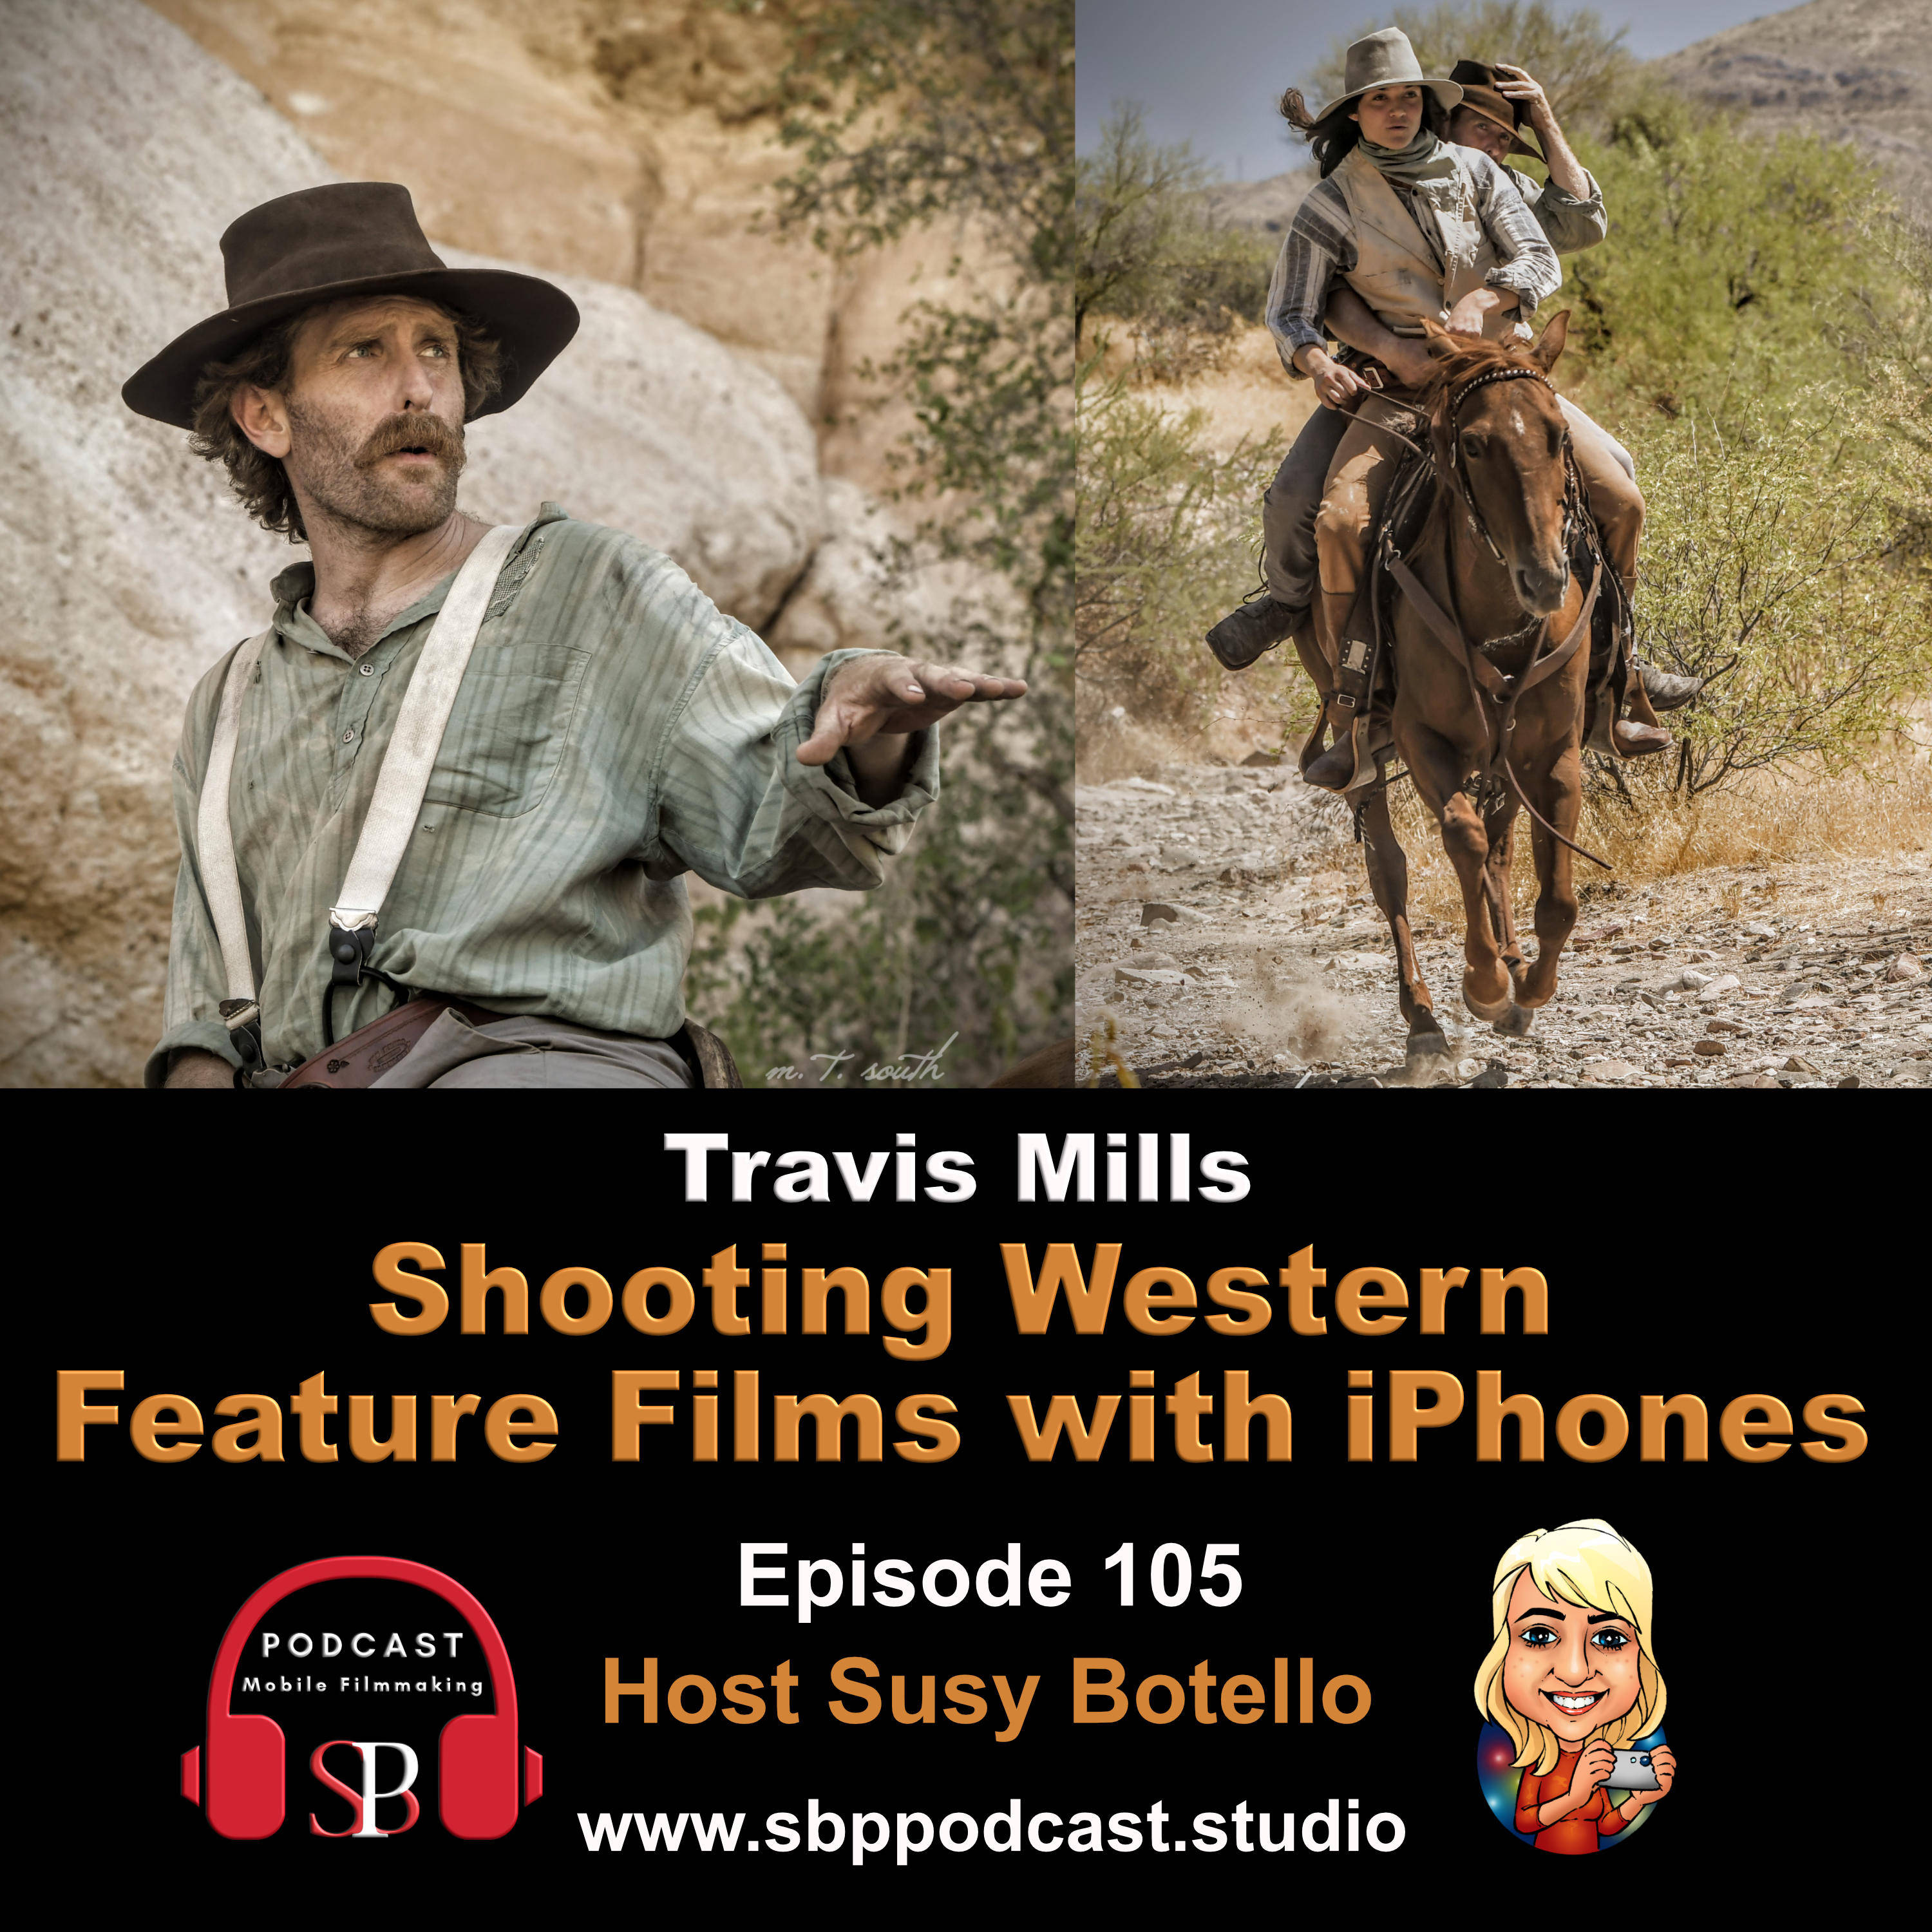 Shooting Western Feature Films with iPhones - Travis Mills